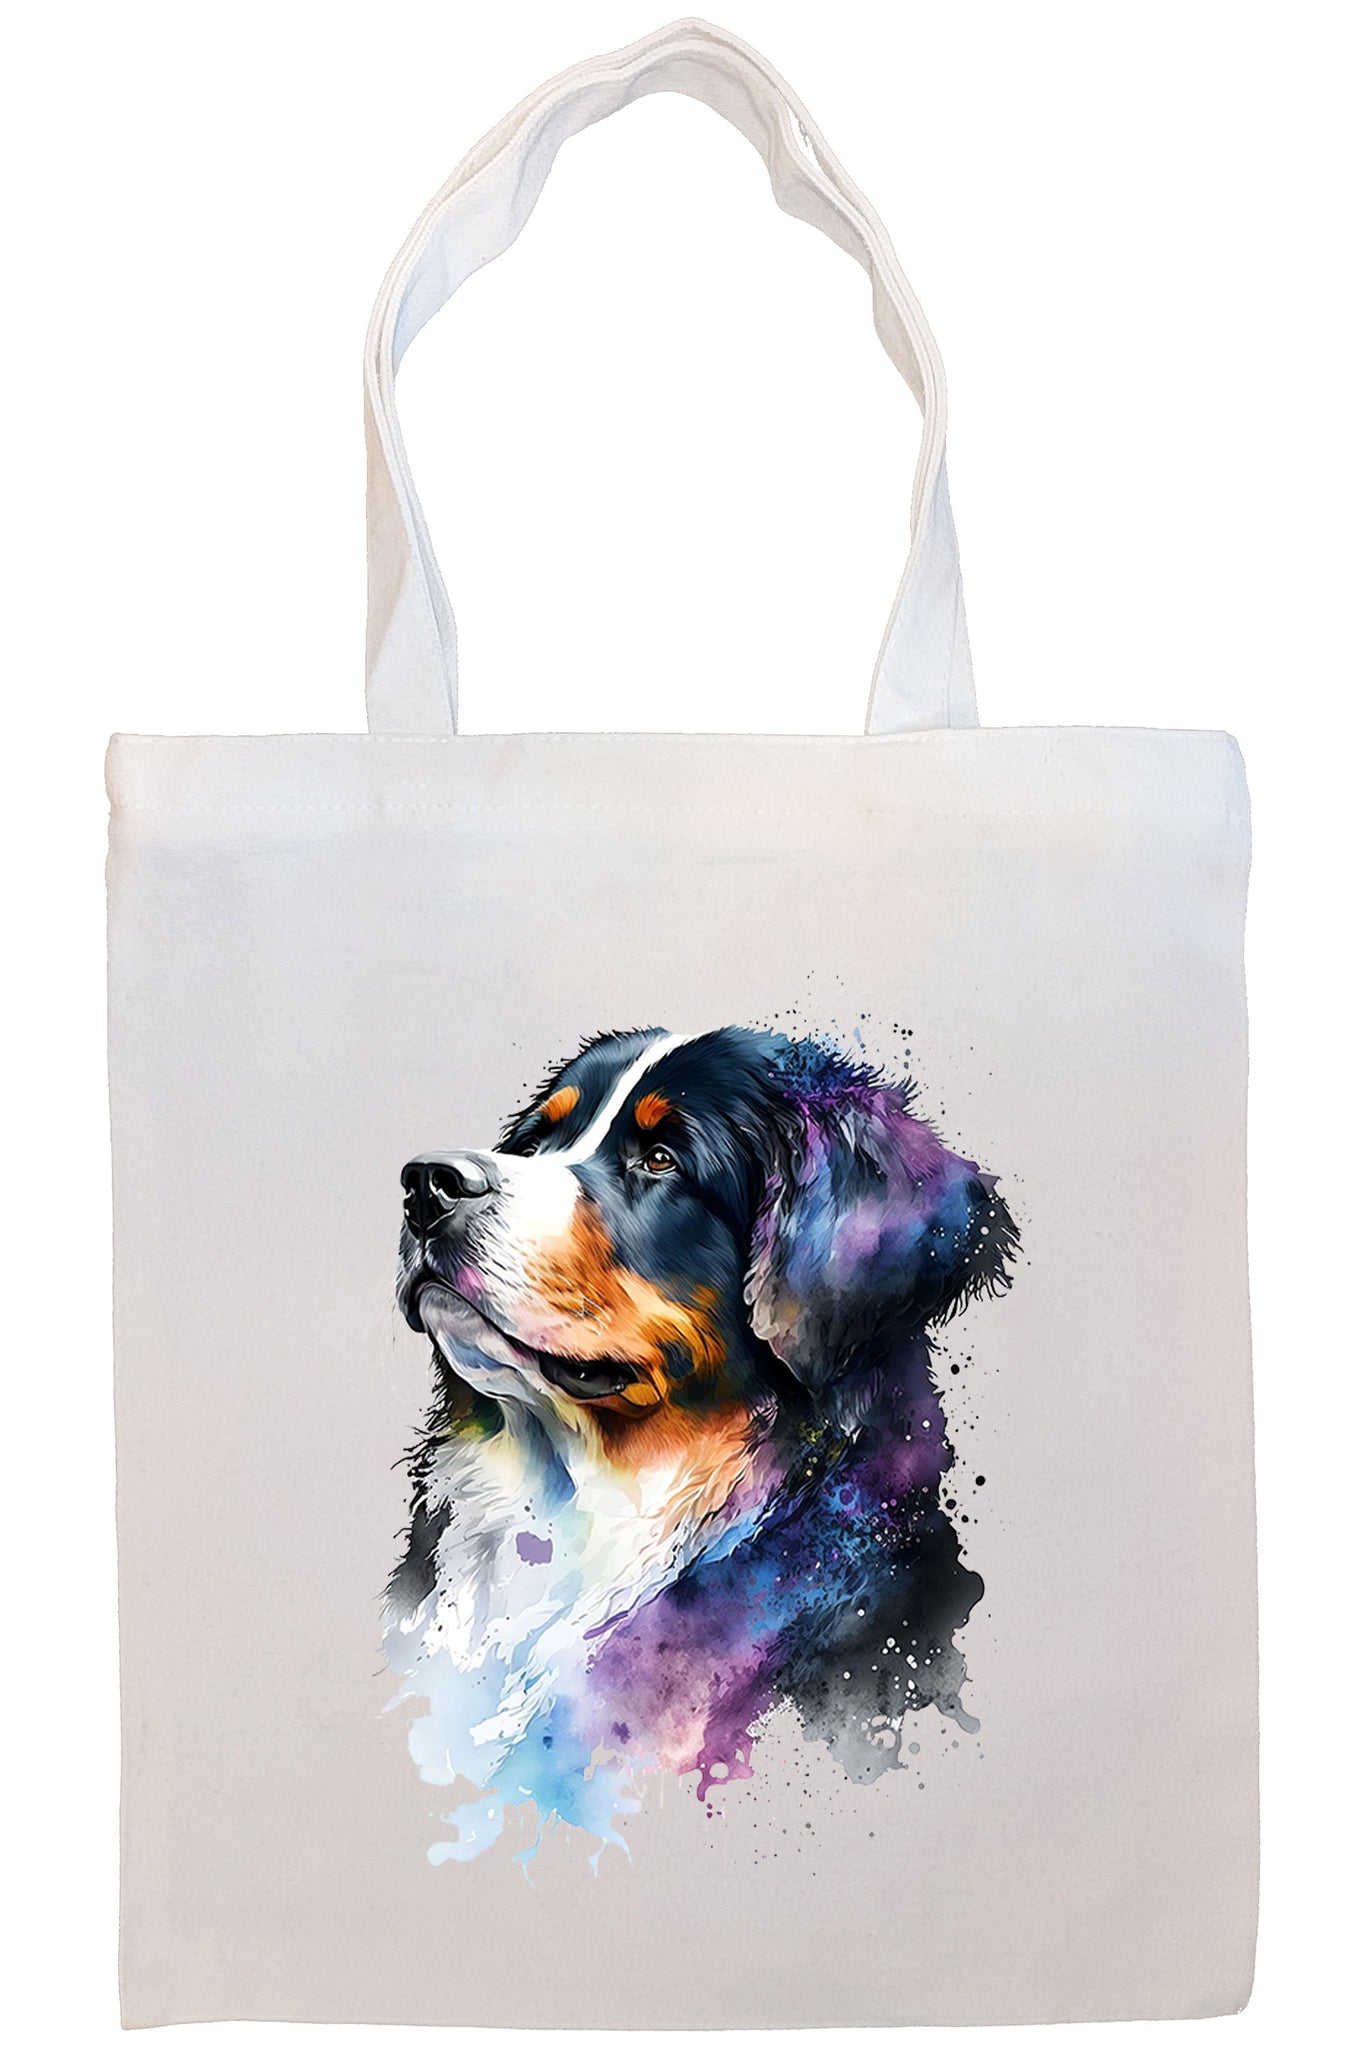 Canvas Tote Bag, Zippered With Handles & Inner Pocket, "Bernise Mountain Dog"